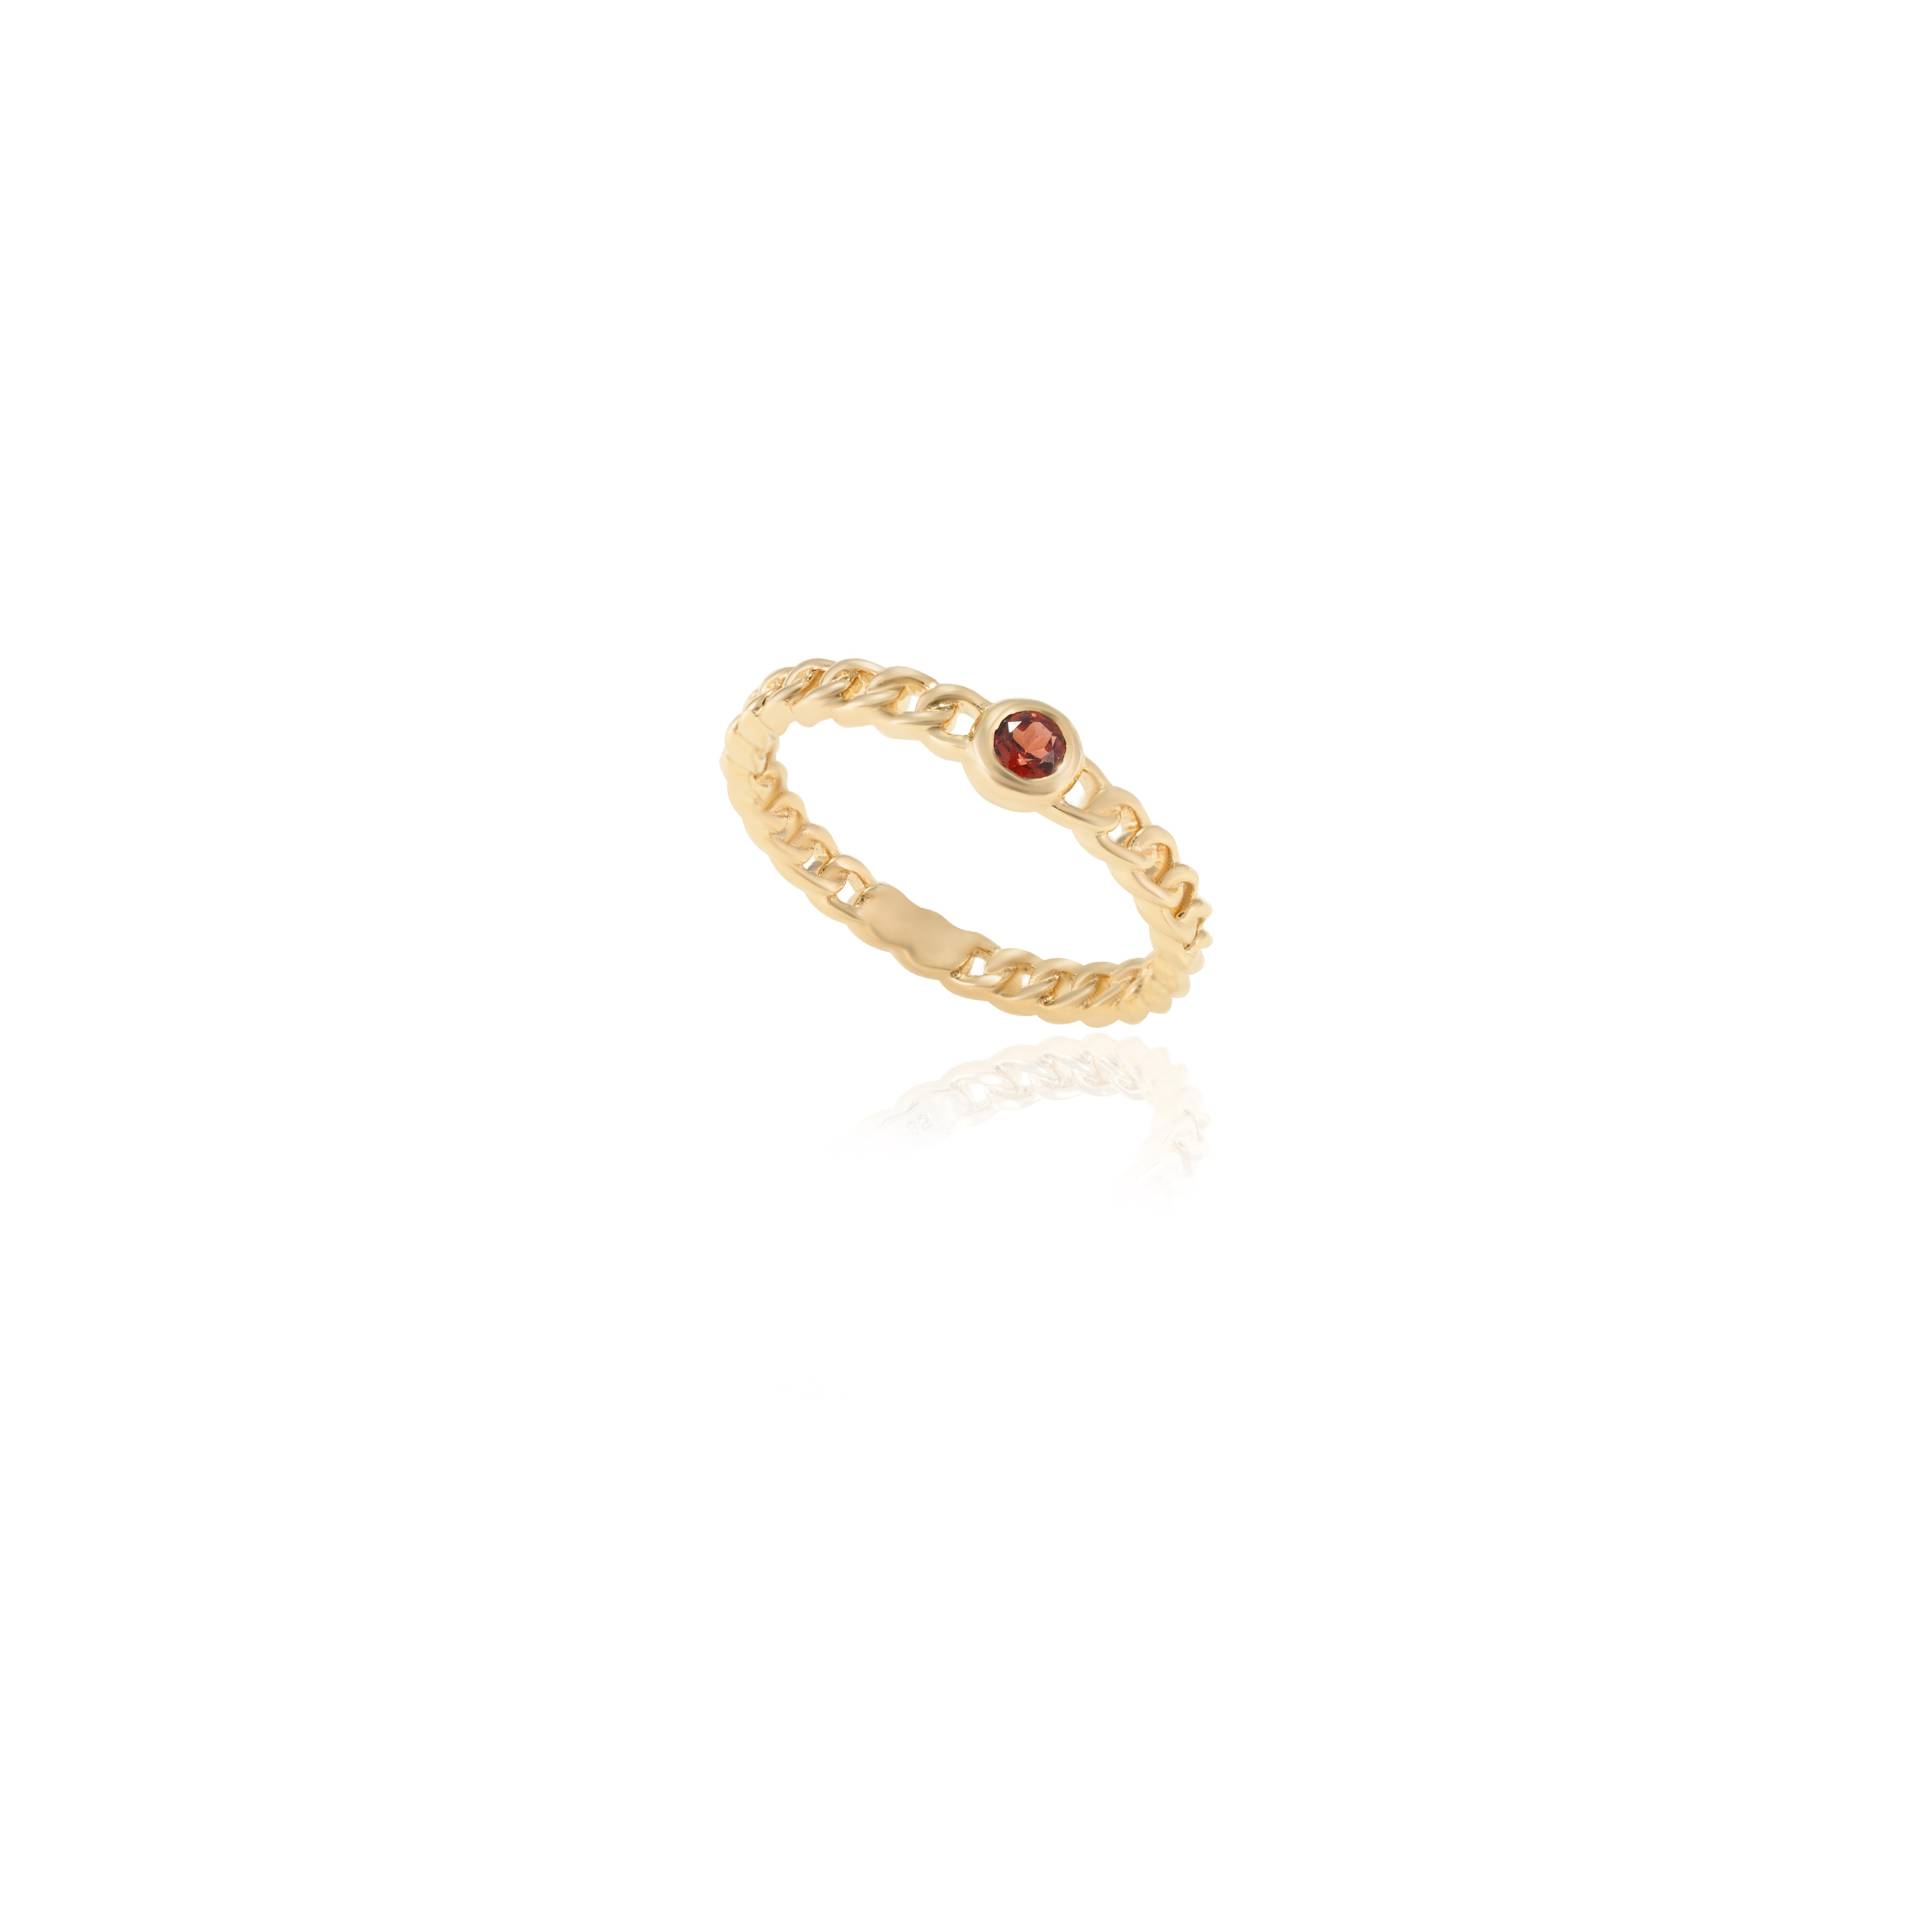 For Sale:  Natural Garnet Curb Chain Ring in 14k Solid Yellow Gold Minimalist Ring 7